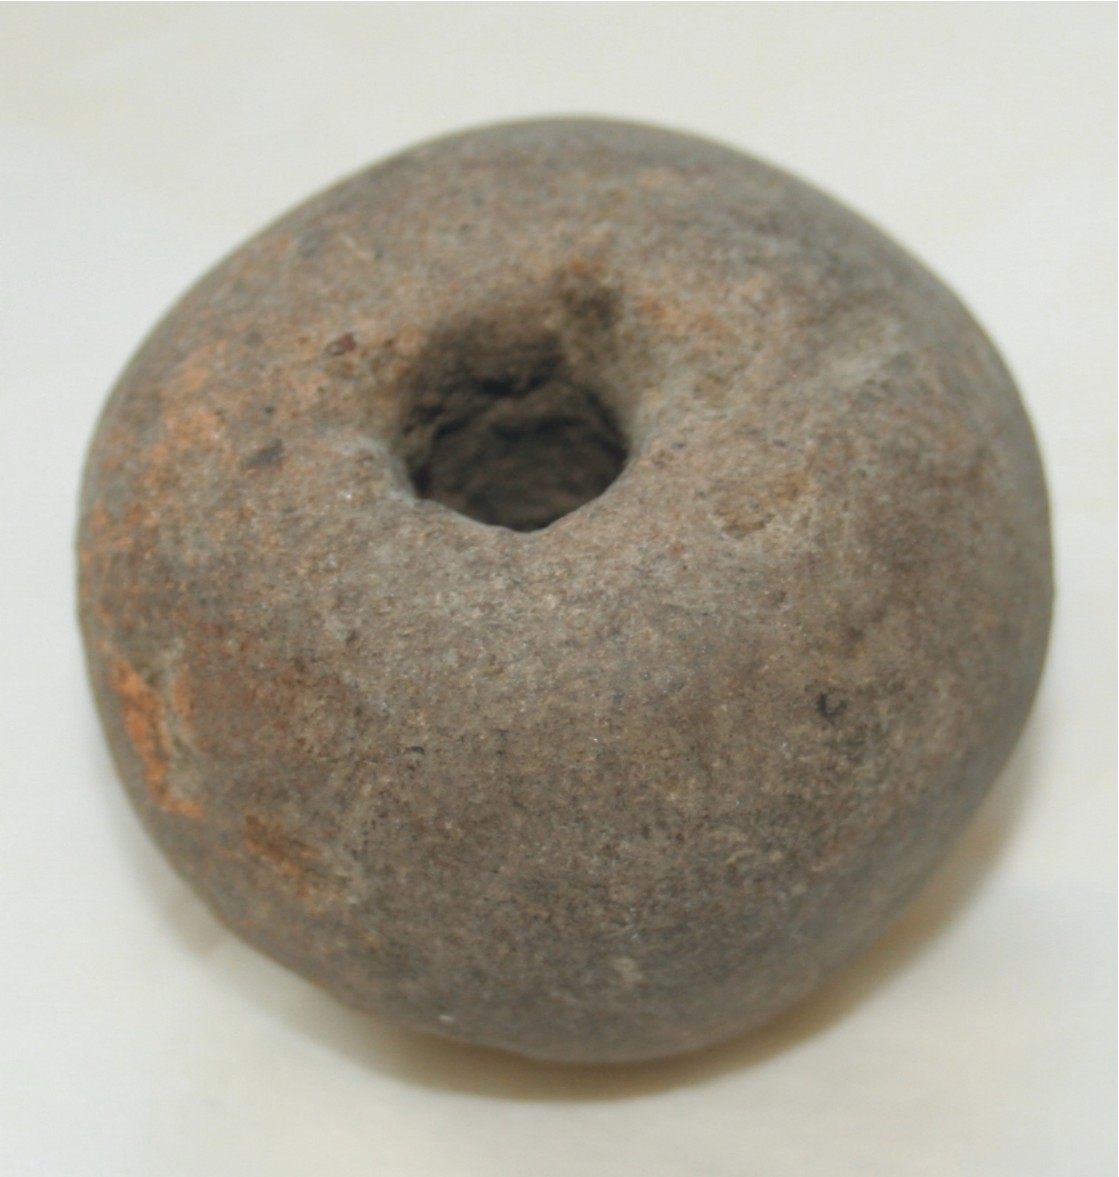 Image for: Spindle whorl